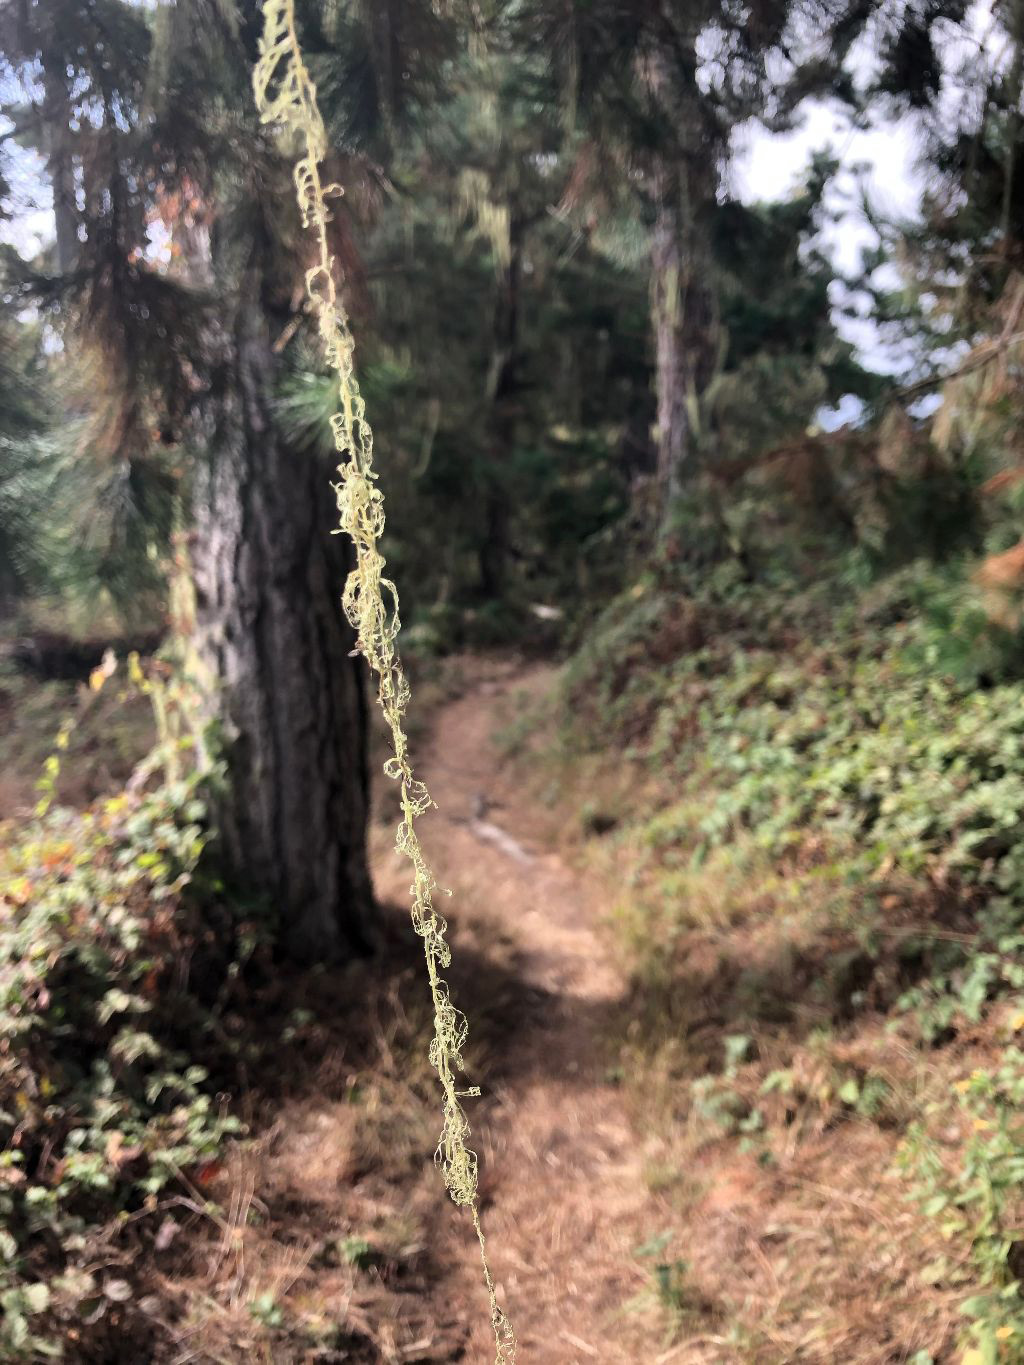 Point Lobos State Natural Reserve, lace lichen strands on Whalers Knoll trail. Photo credit: Don Koch.